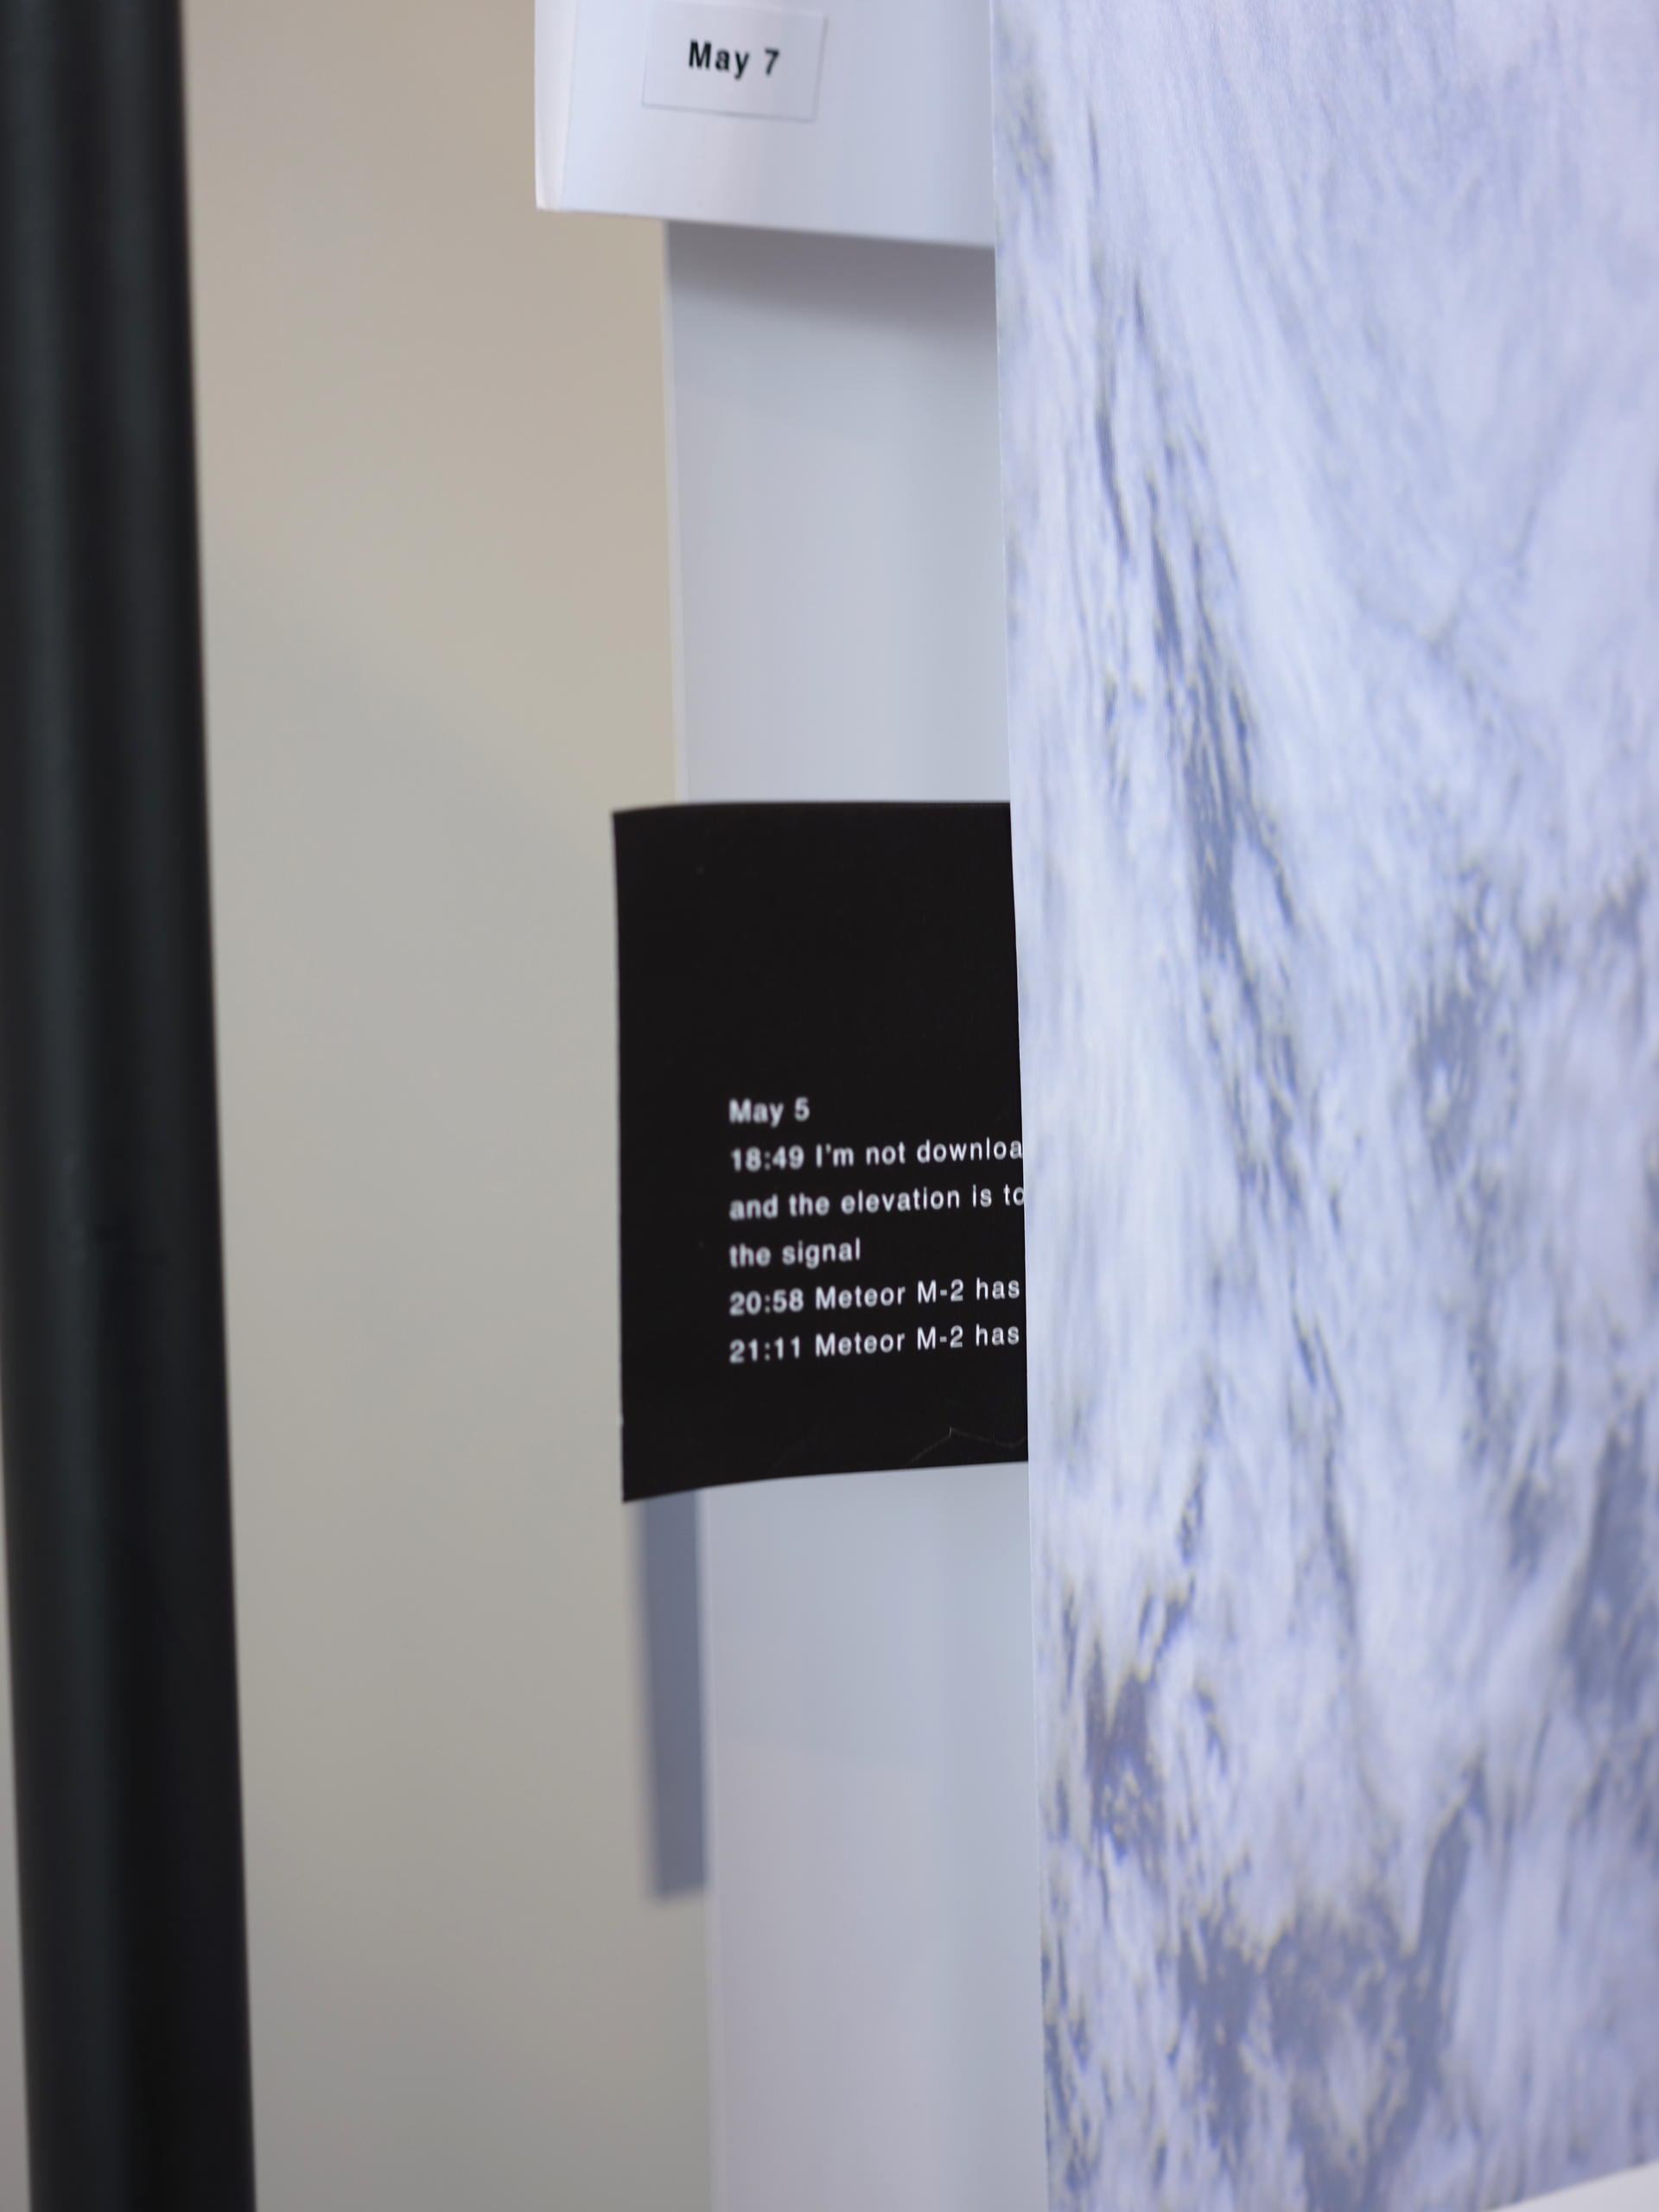 Installation view of "Do Clouds Hate Weather Satellites?"